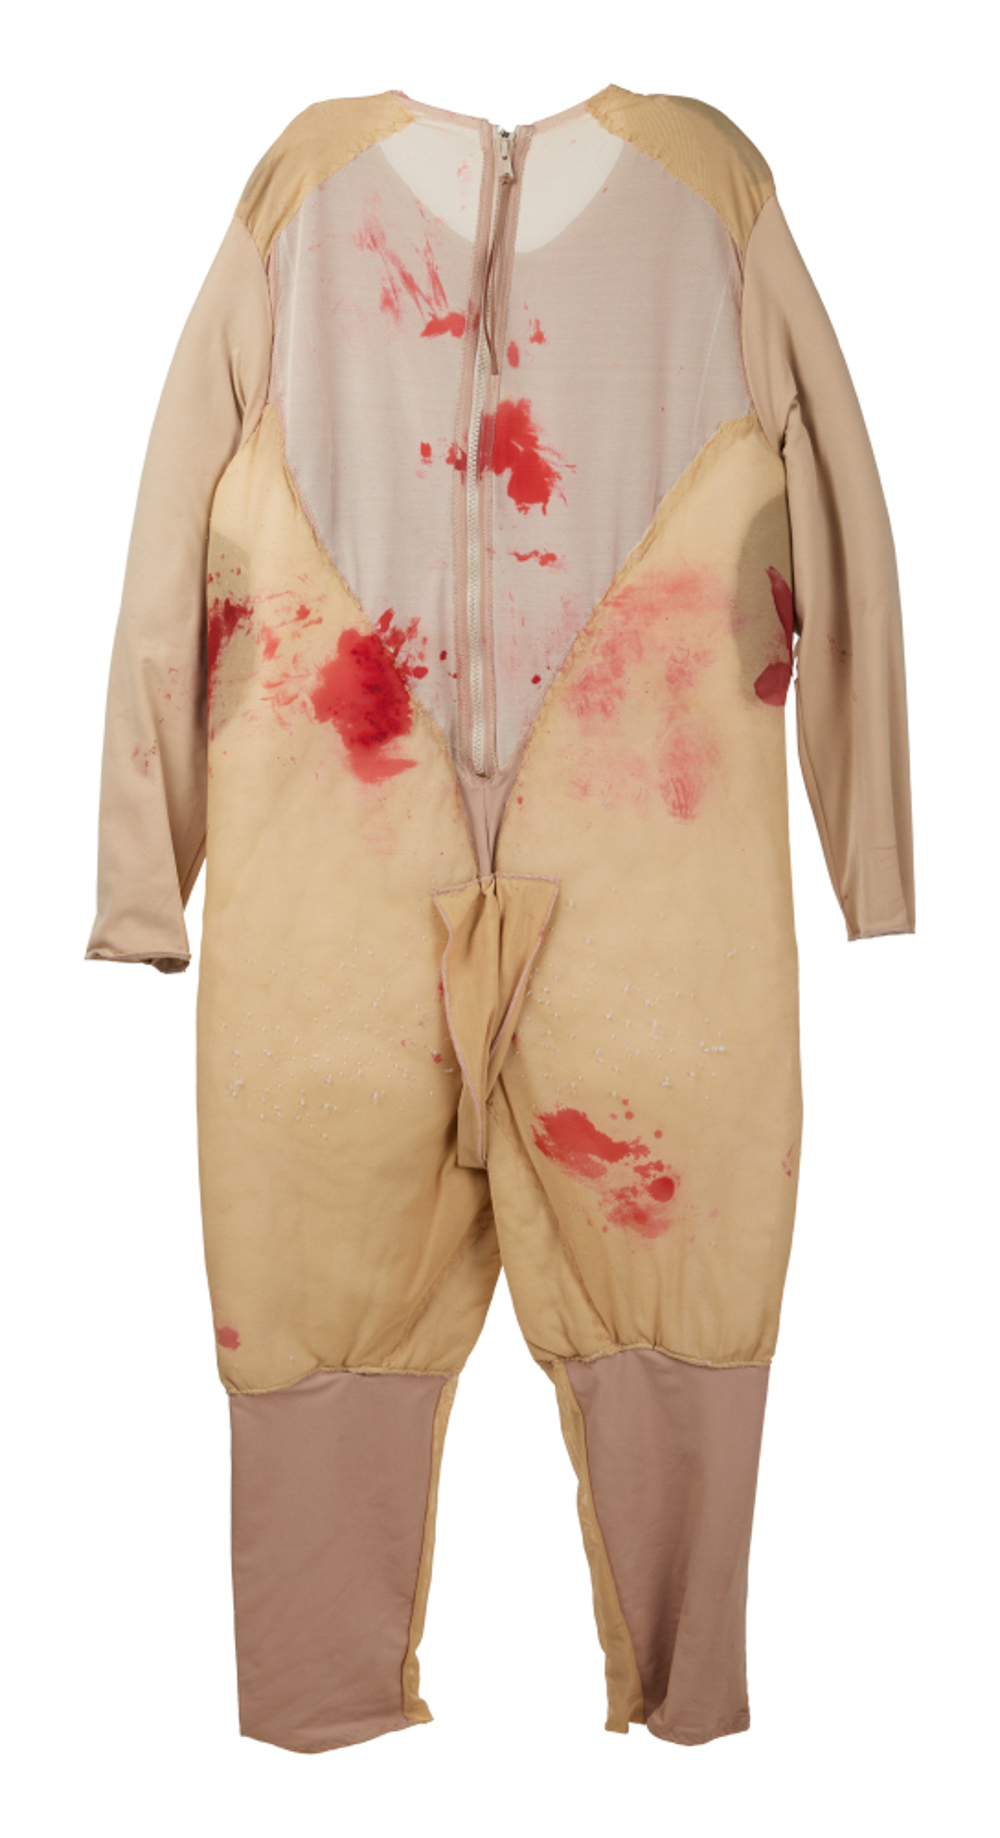 ALL THE KING'S MEN | SEAN PENN "WILLIE STARK" BLOODY FAT SUIT - Image 2 of 4